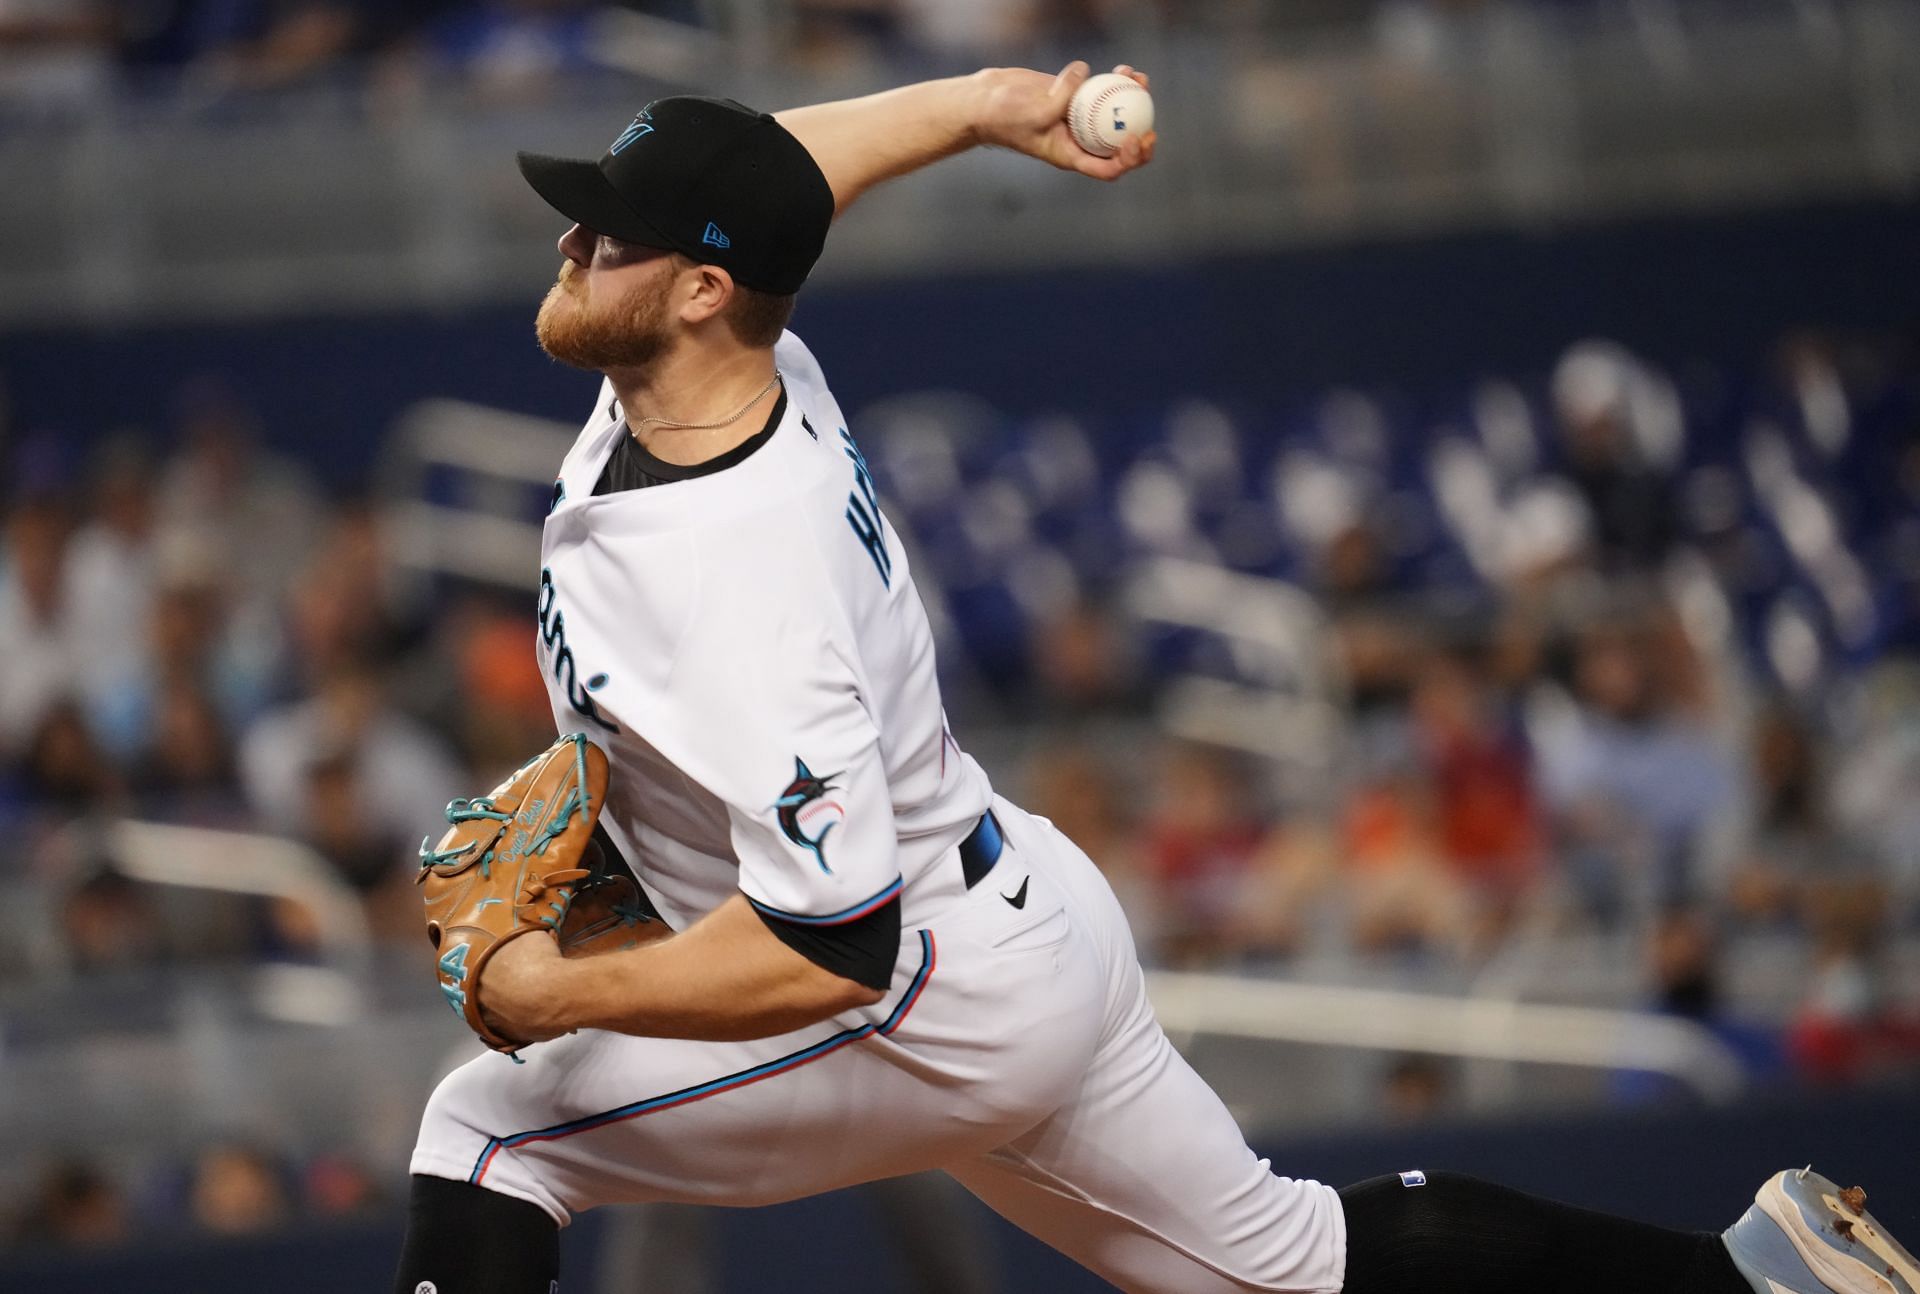 David Hess #41 of the Miami Marlins delivers a pitch in the sixth inning against the New York Mets at loanDepot park on August 05, 2021 in Miami, Florida. (Photo by Mark Brown/Getty Images)